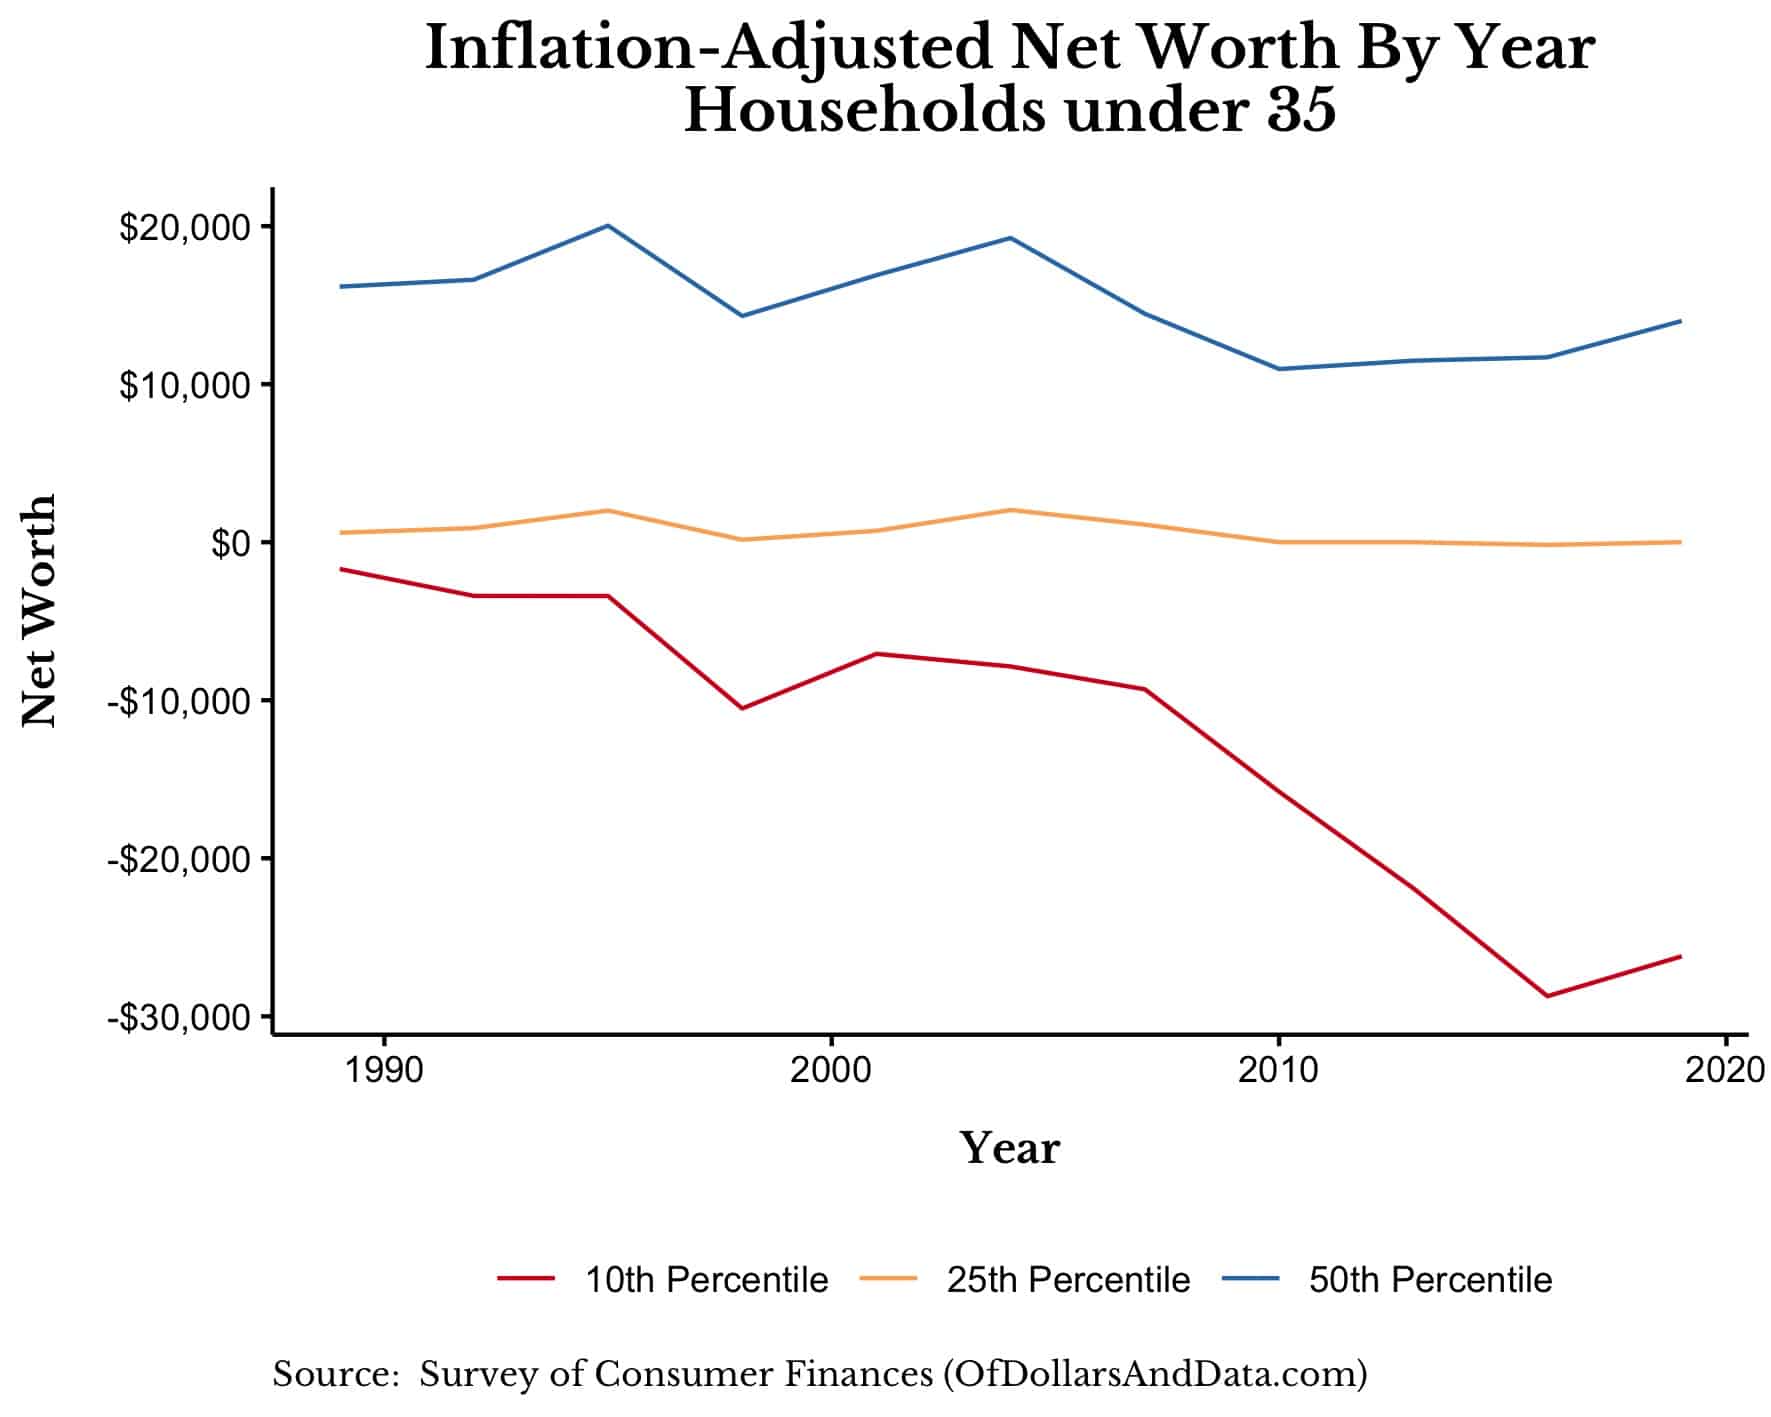 Inflation-adjusted net worth by year for households under 35 for various percentile levels